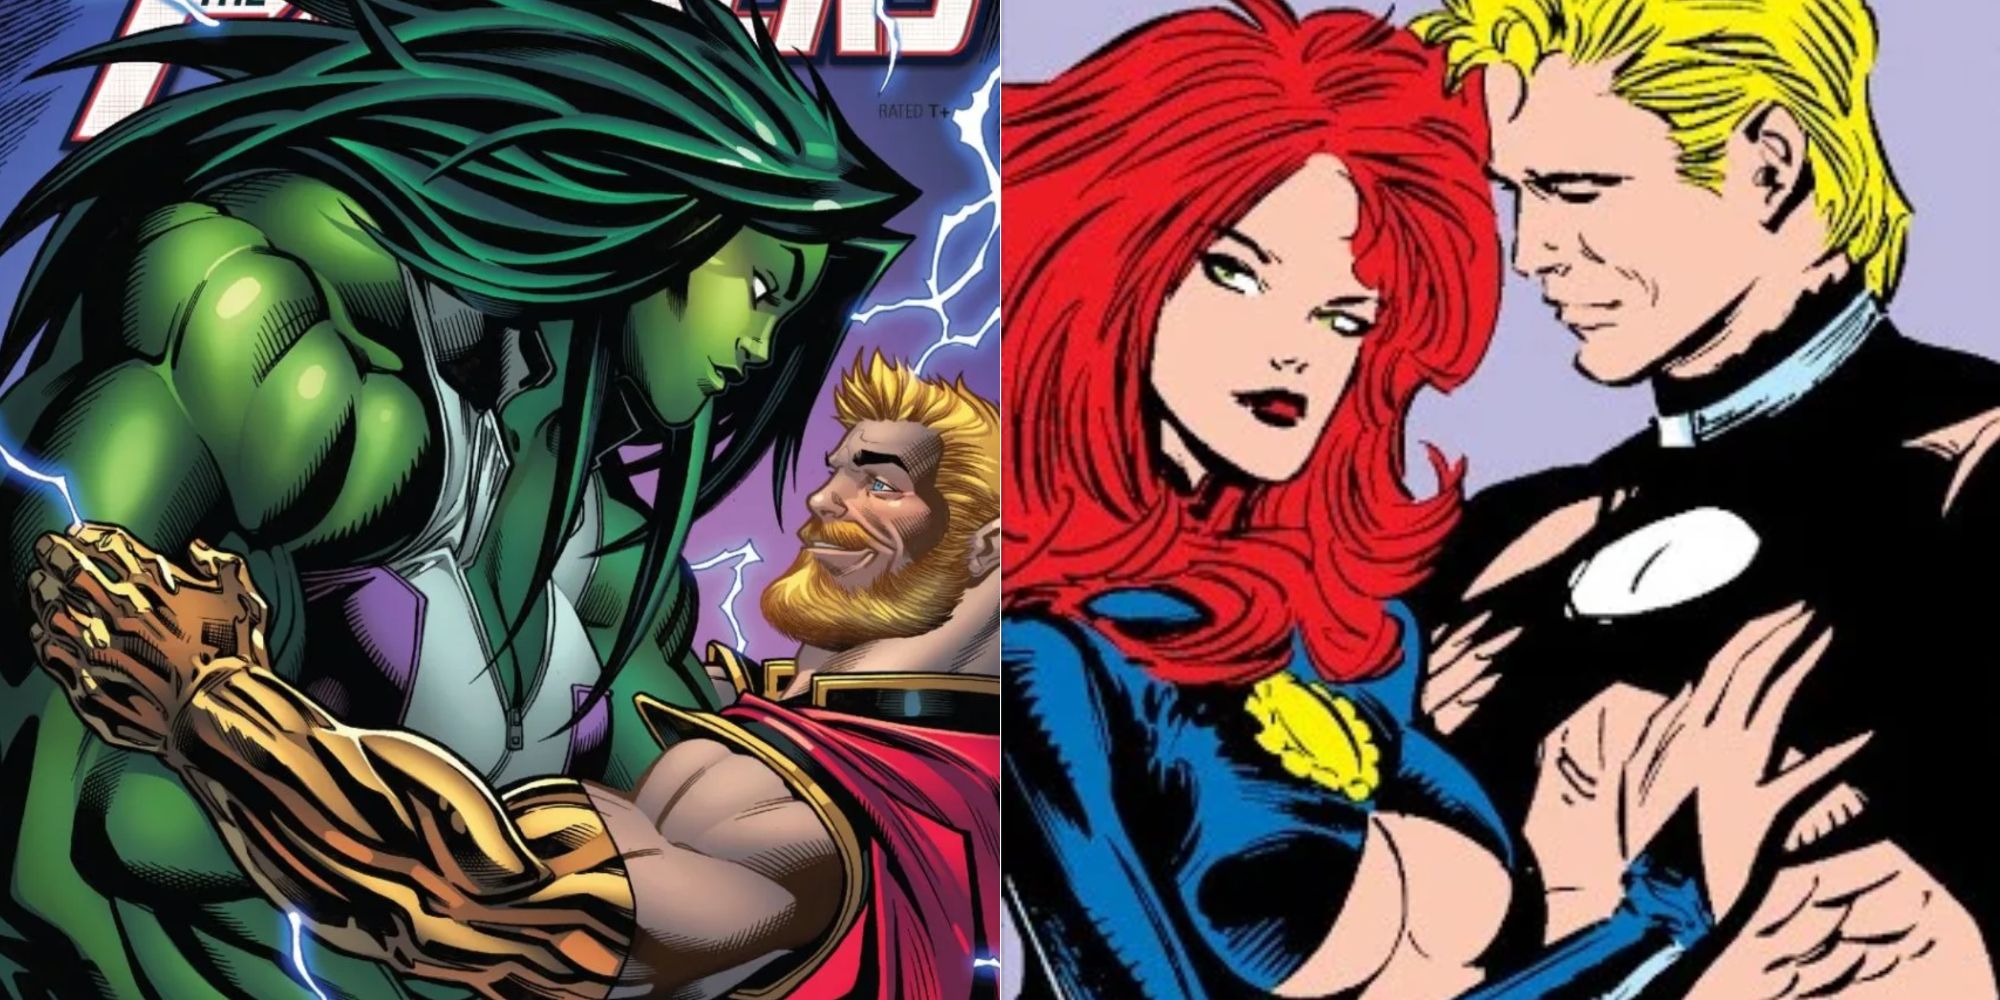 Thor and She-Hulk (left) and Madelyne Pryor and Havok (right)